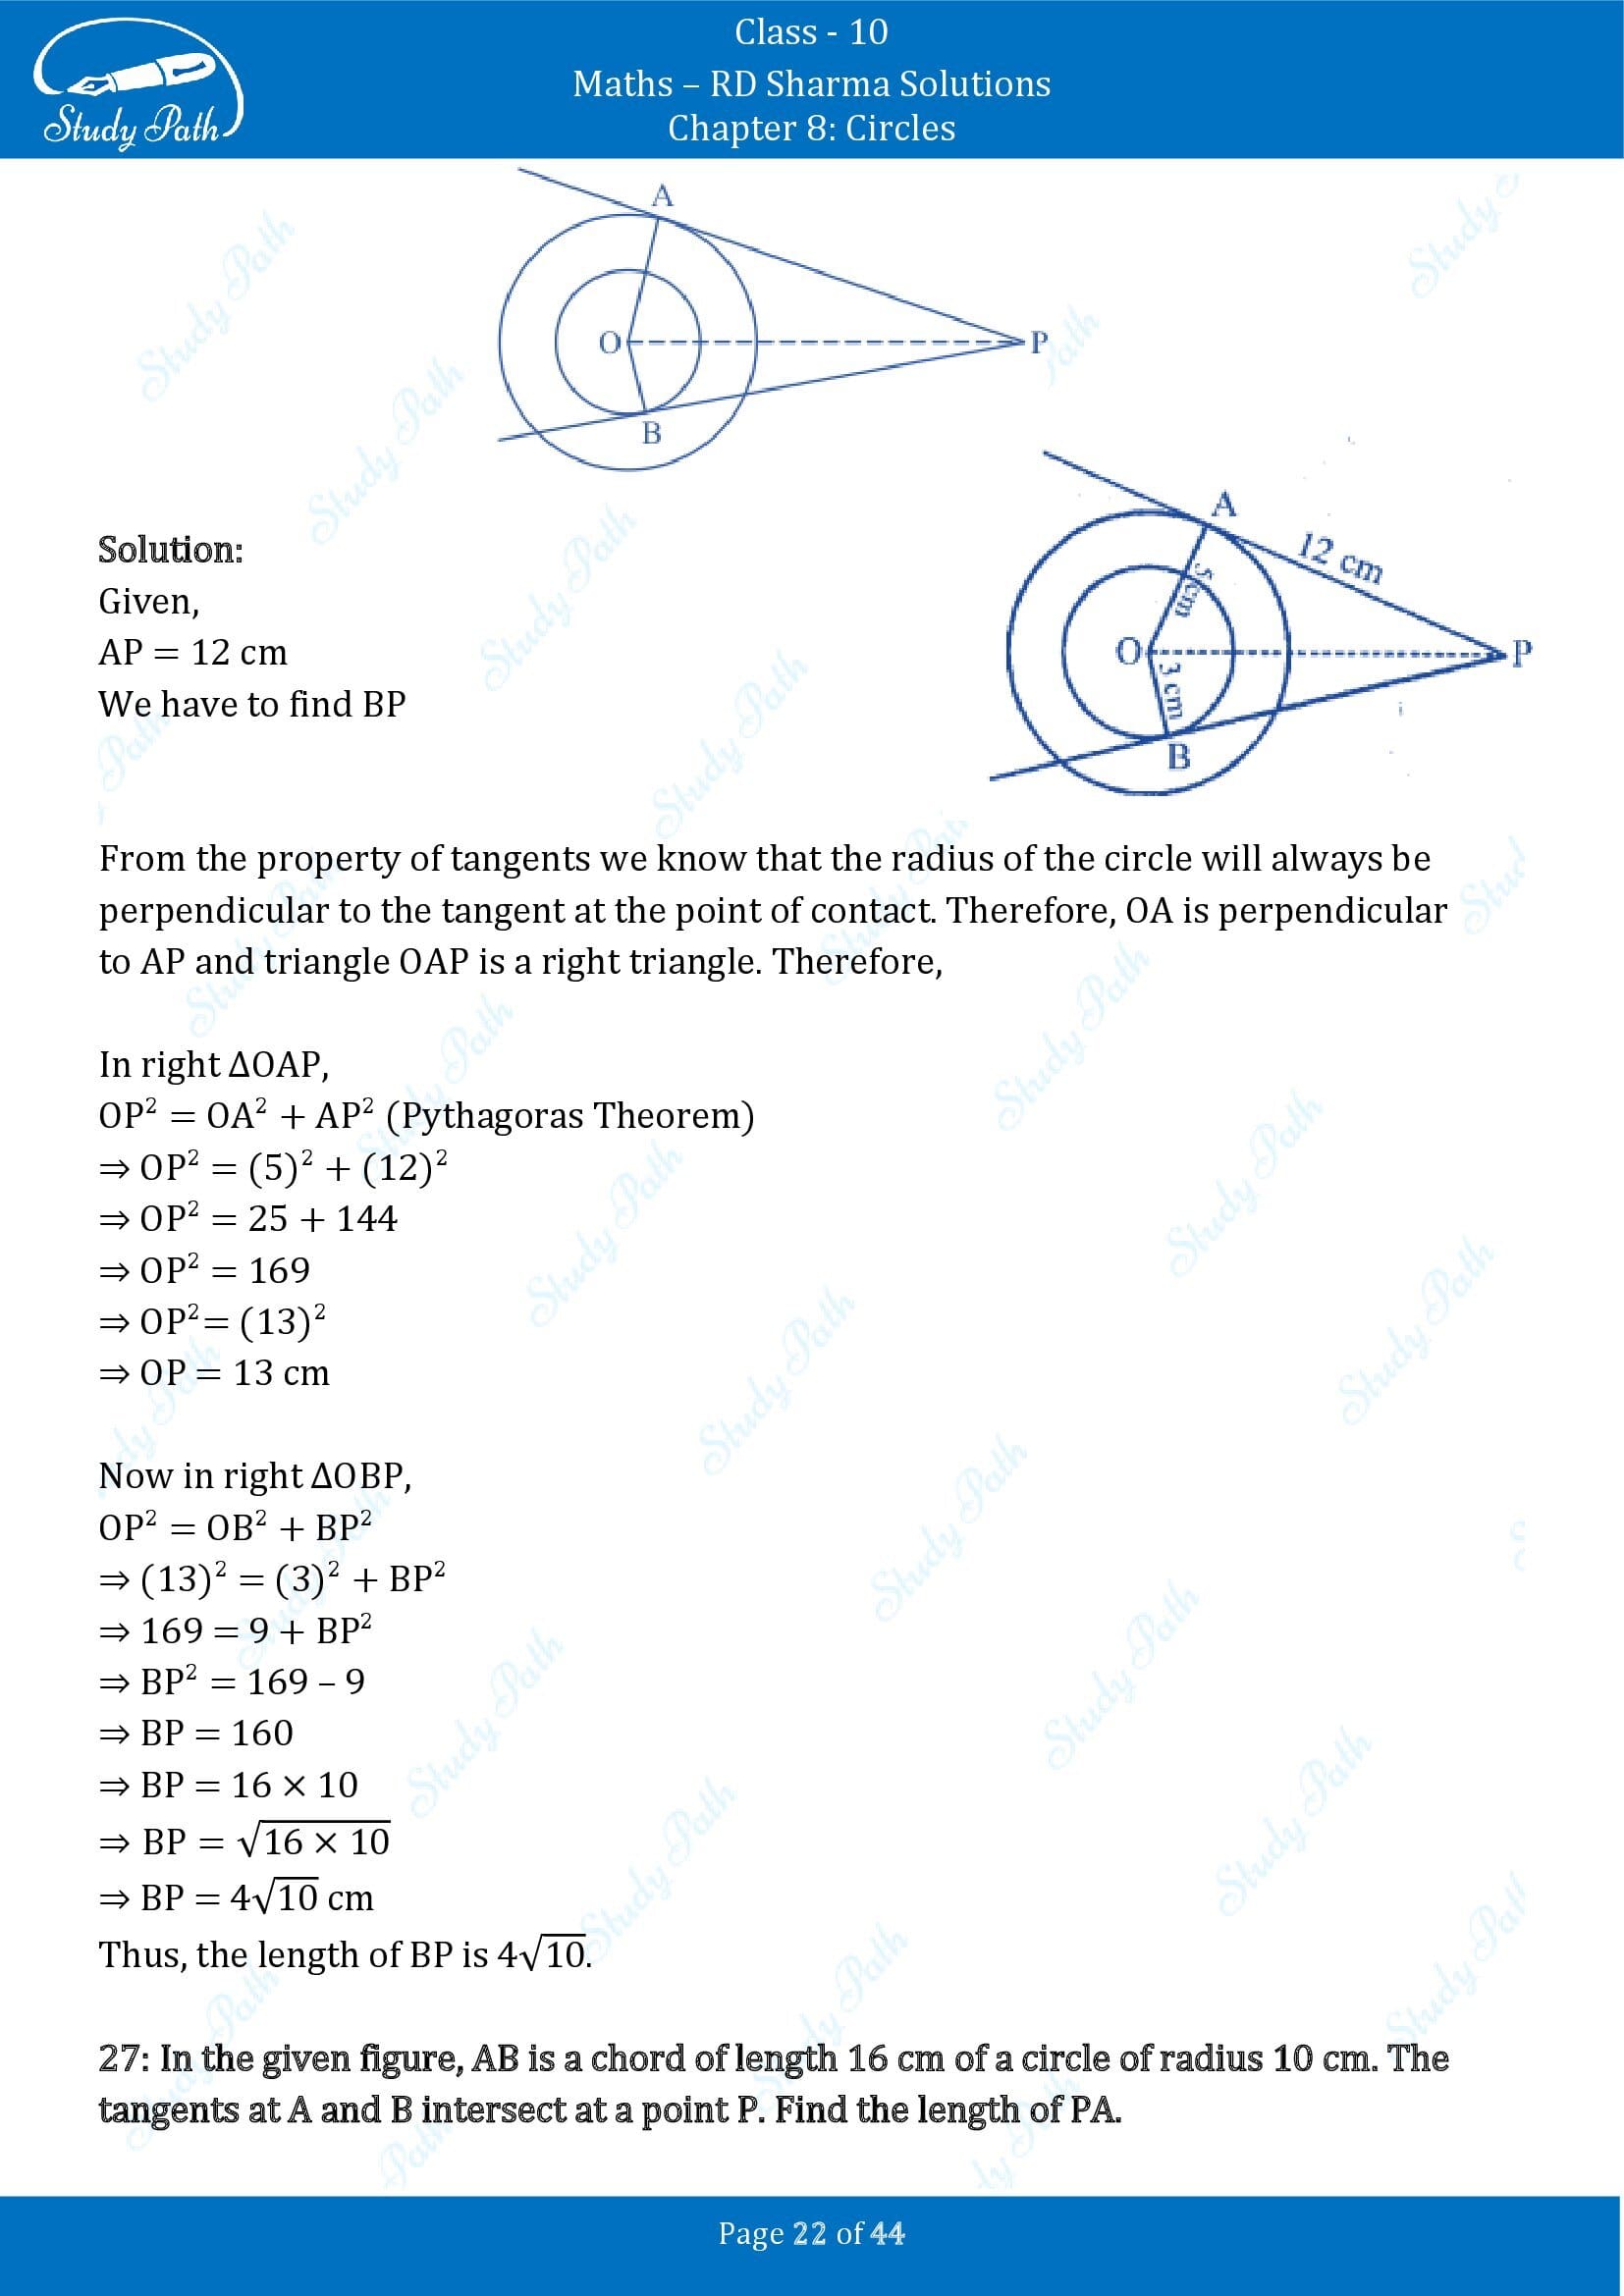 RD Sharma Solutions Class 10 Chapter 8 Circles Exercise 8.2 00022